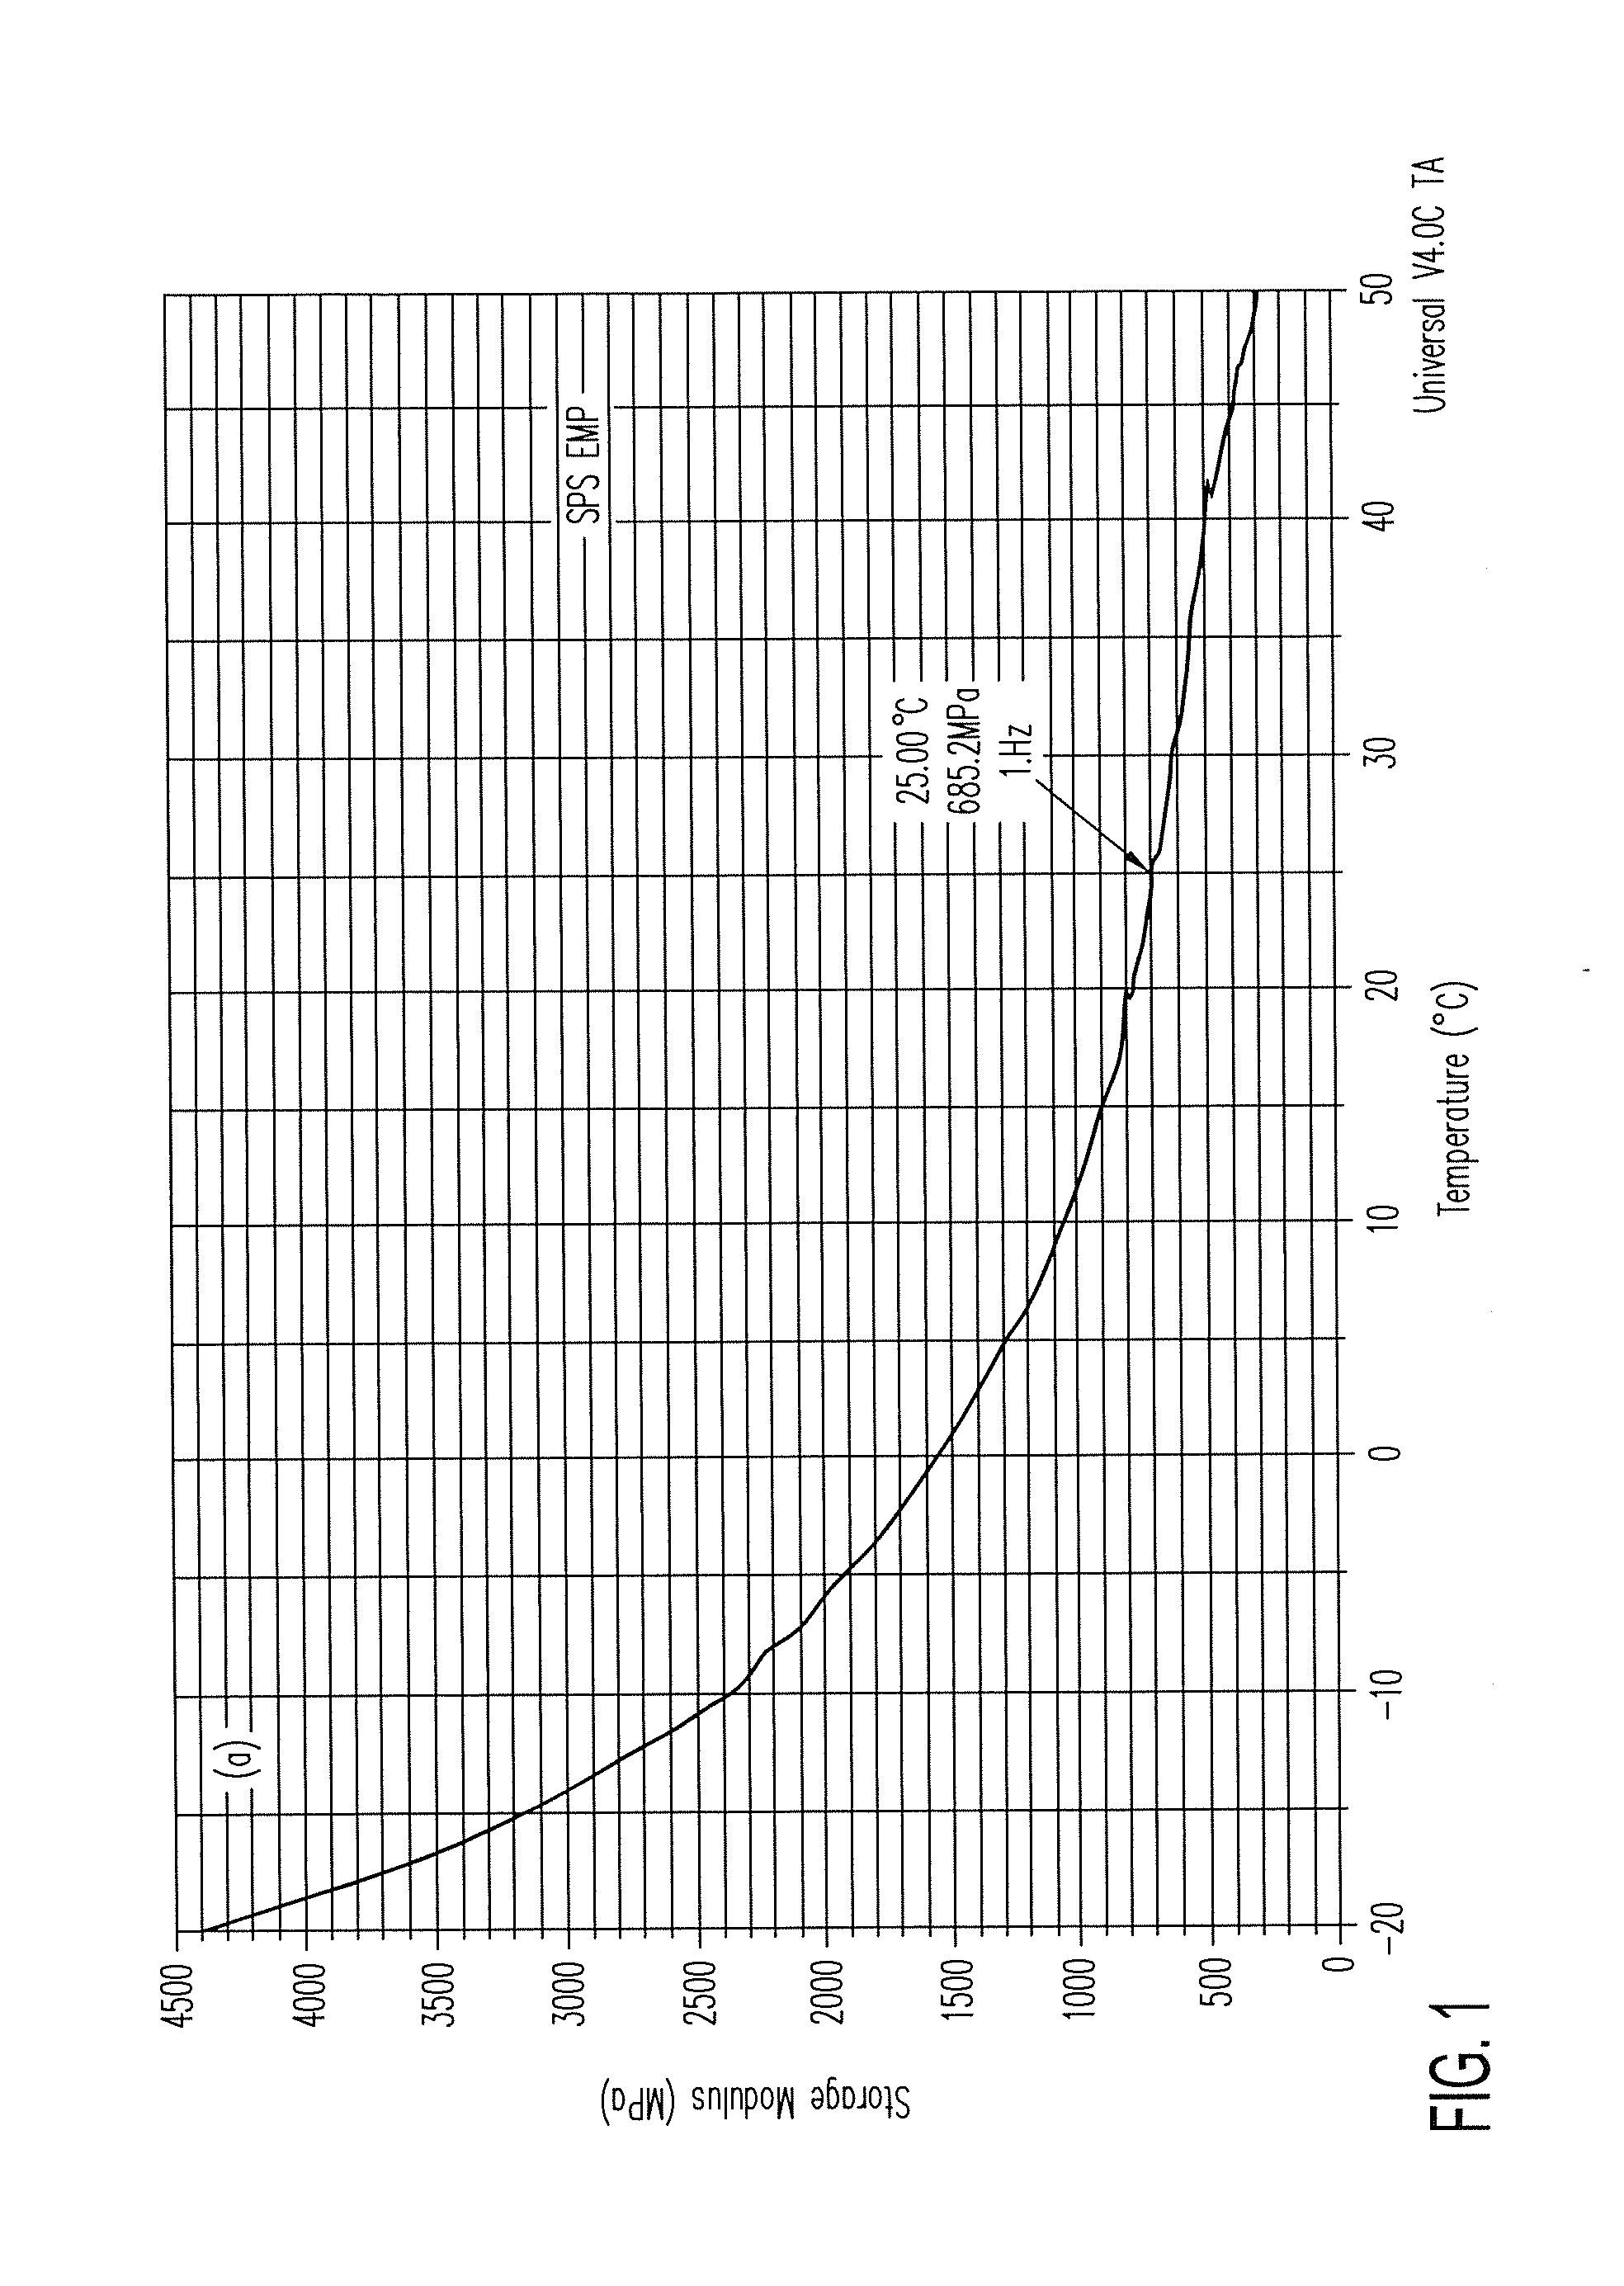 EMP Actuators for Deformable Surface and Keyboard Application